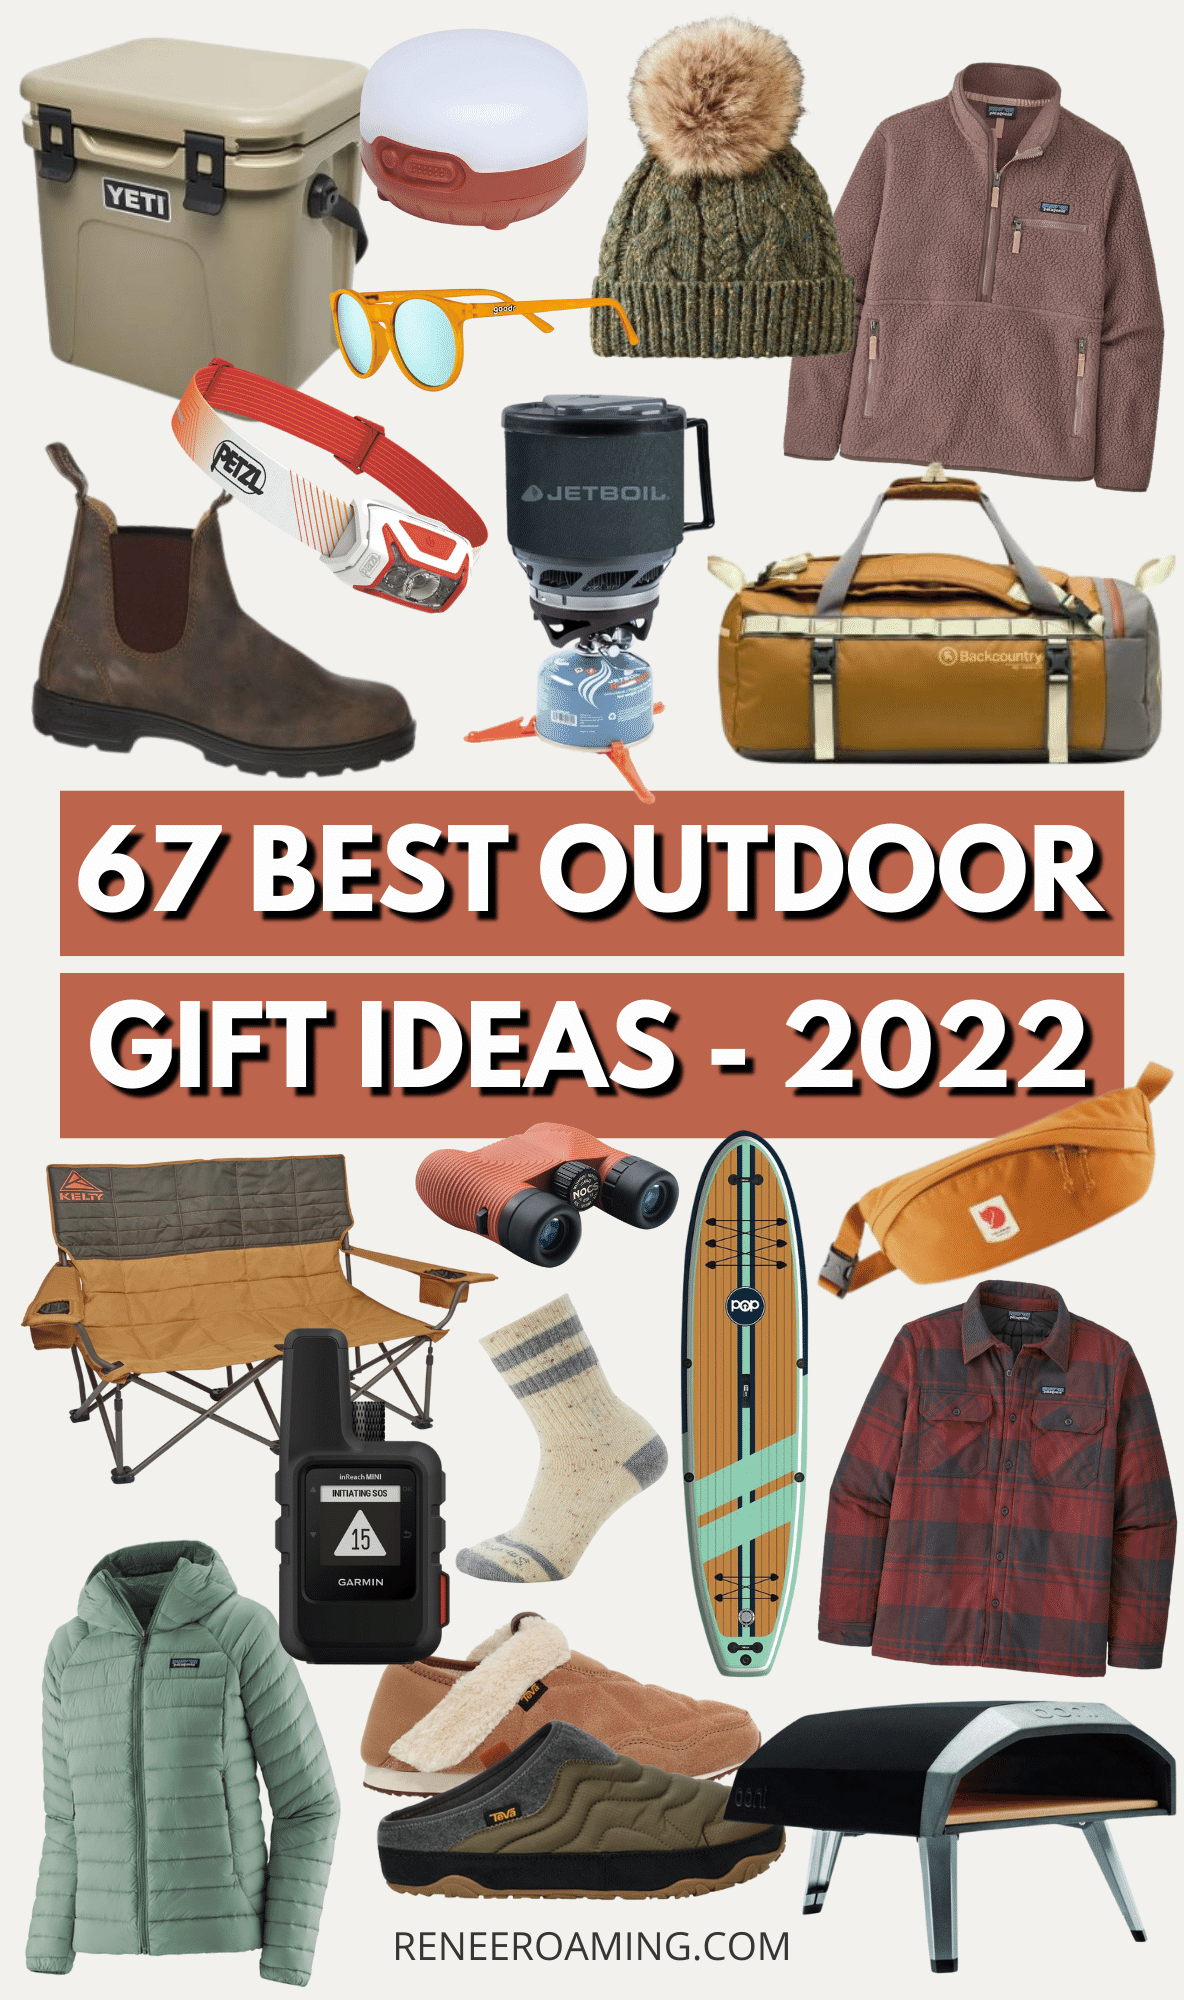 Best Gifts For Outdoor Lovers 2022 - Gifts for Hikers, Campers and Travelers